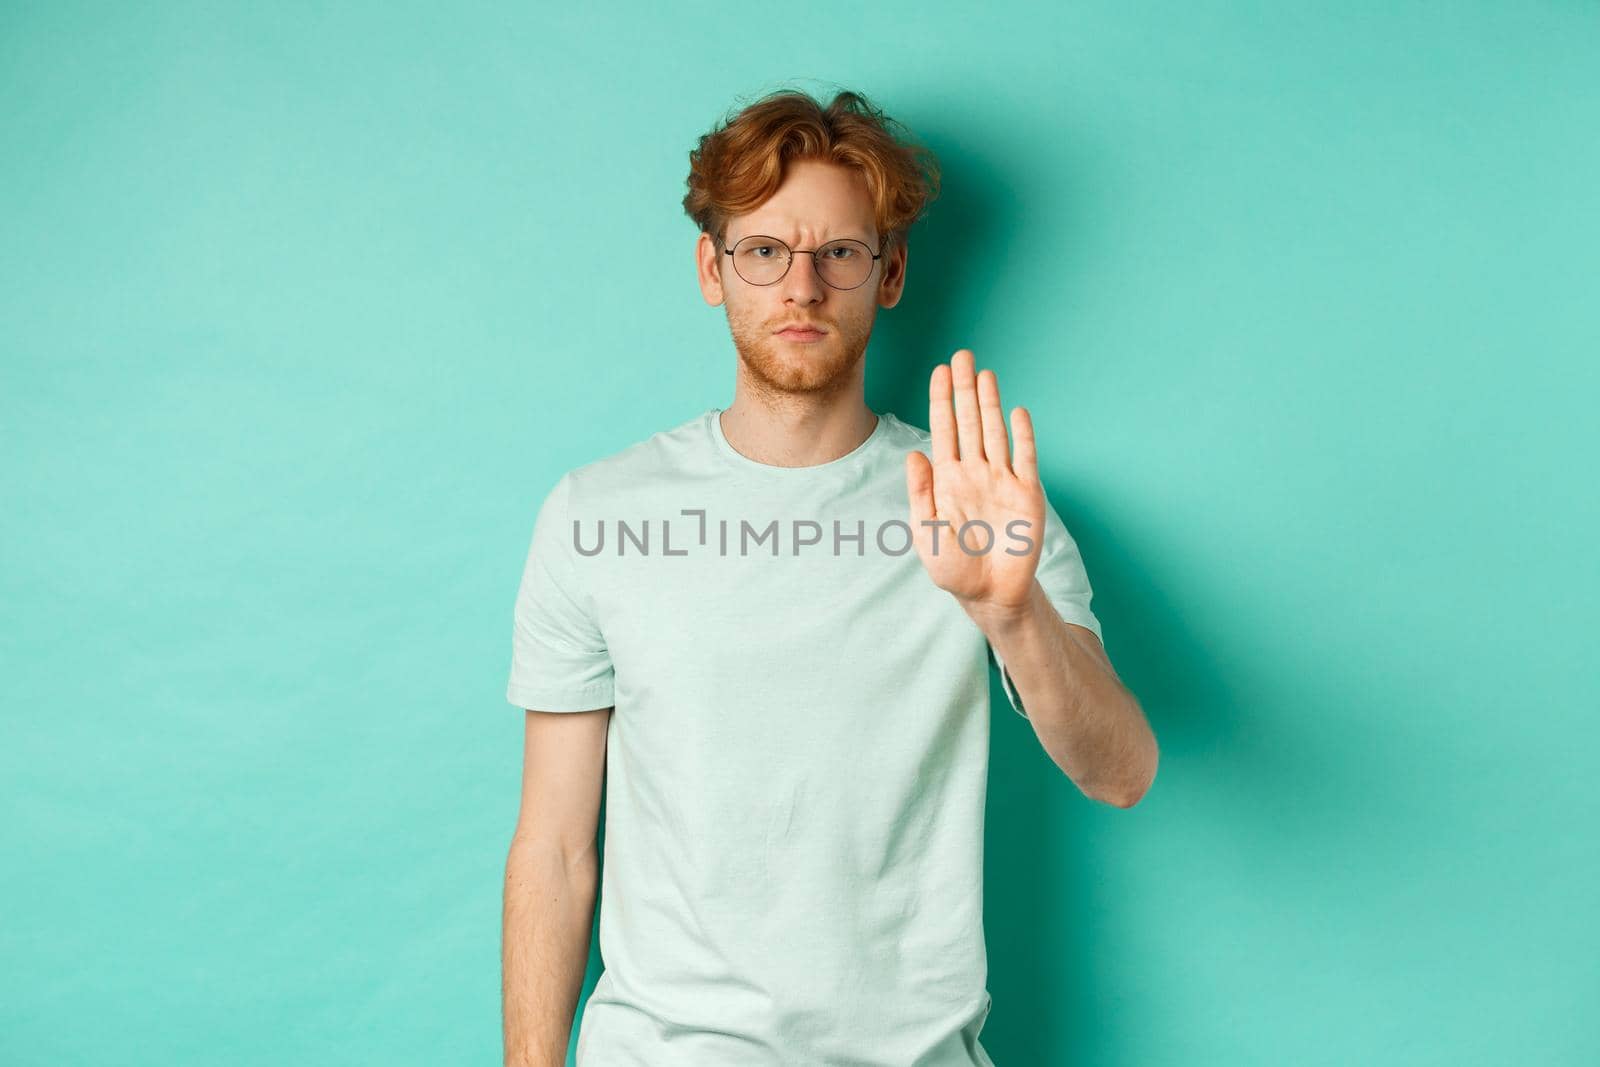 Angry and serious young man with red hair, wearing glasses, showing stop gesture, telling no, disapprove and prohibit something bad, standing over turquoise background.